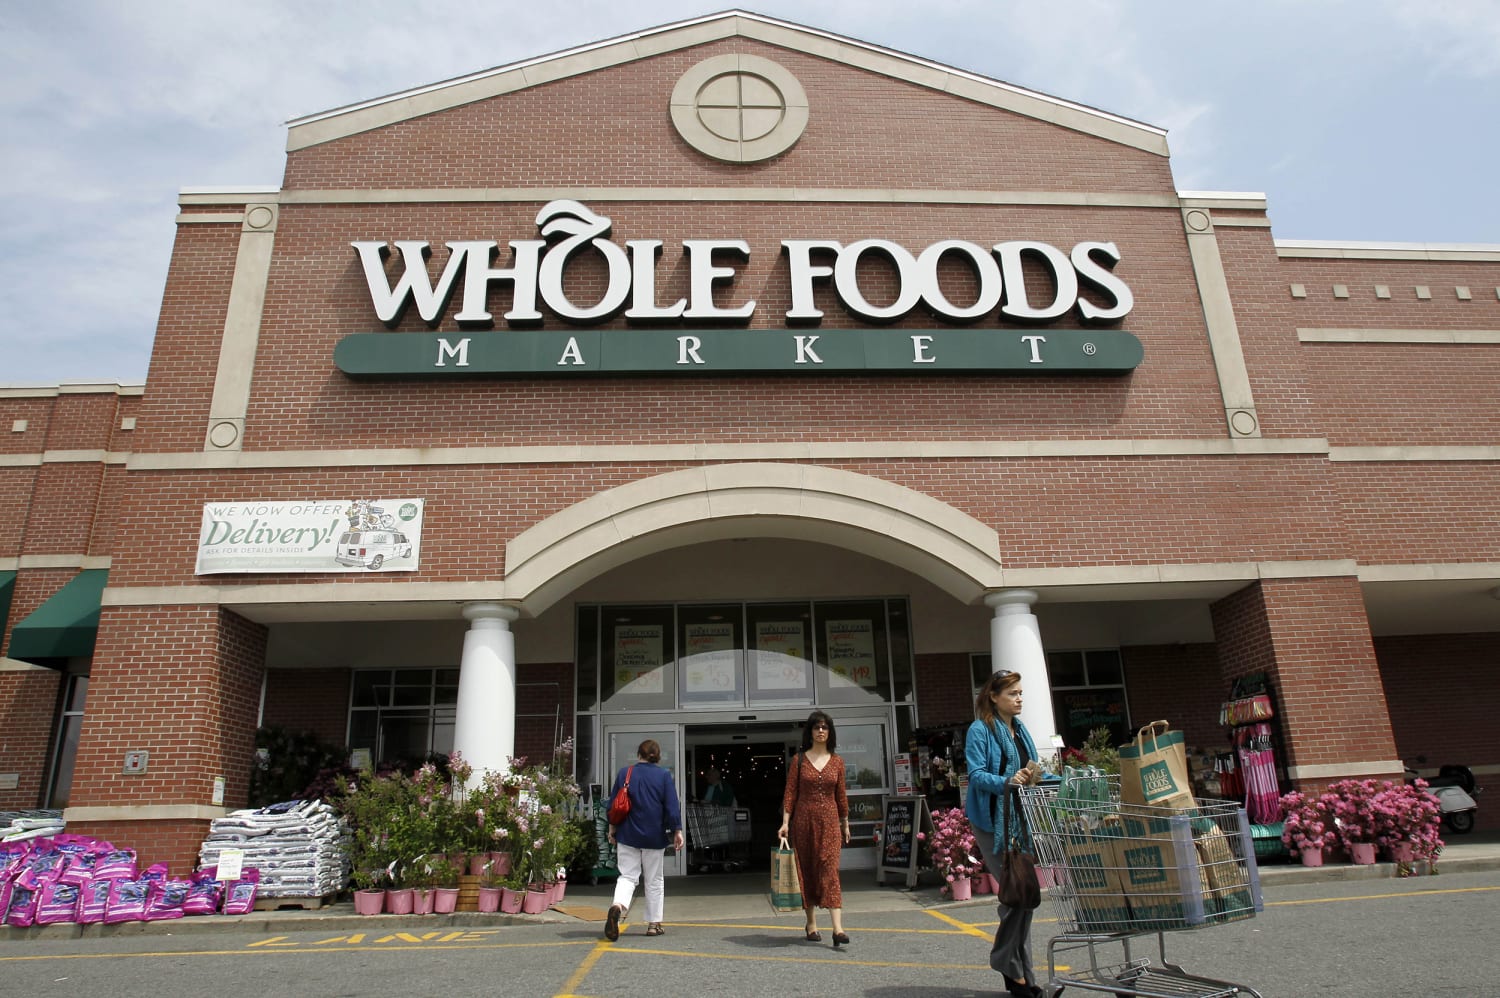 https://media-cldnry.s-nbcnews.com/image/upload/newscms/2016_09/999836/whole-foods-today-inline-1-160304.jpg